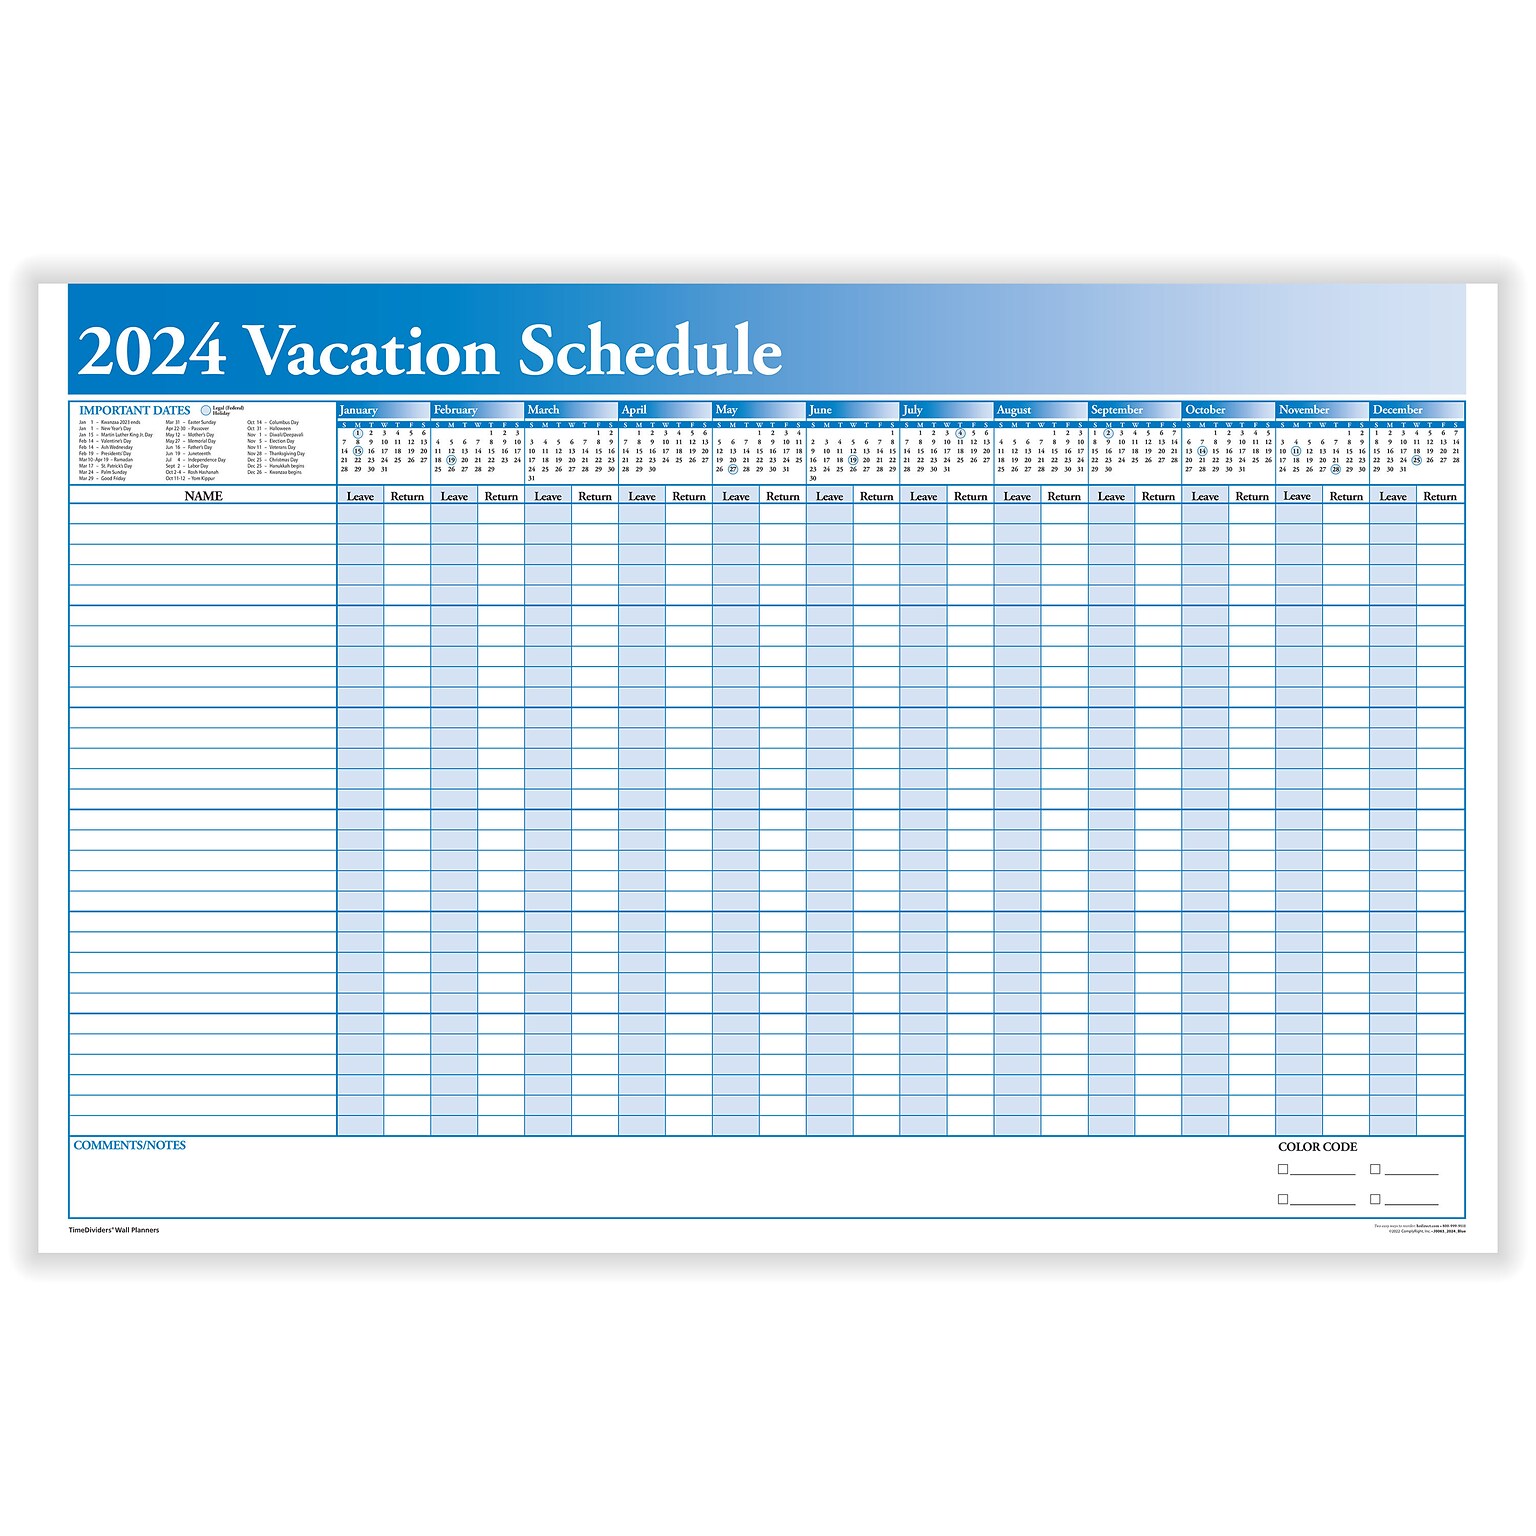 2024 ComplyRight Full Vacation Schedule, 24 x 36 Yearly Dry Erase Wall Calendar, Blue/White (J0063)